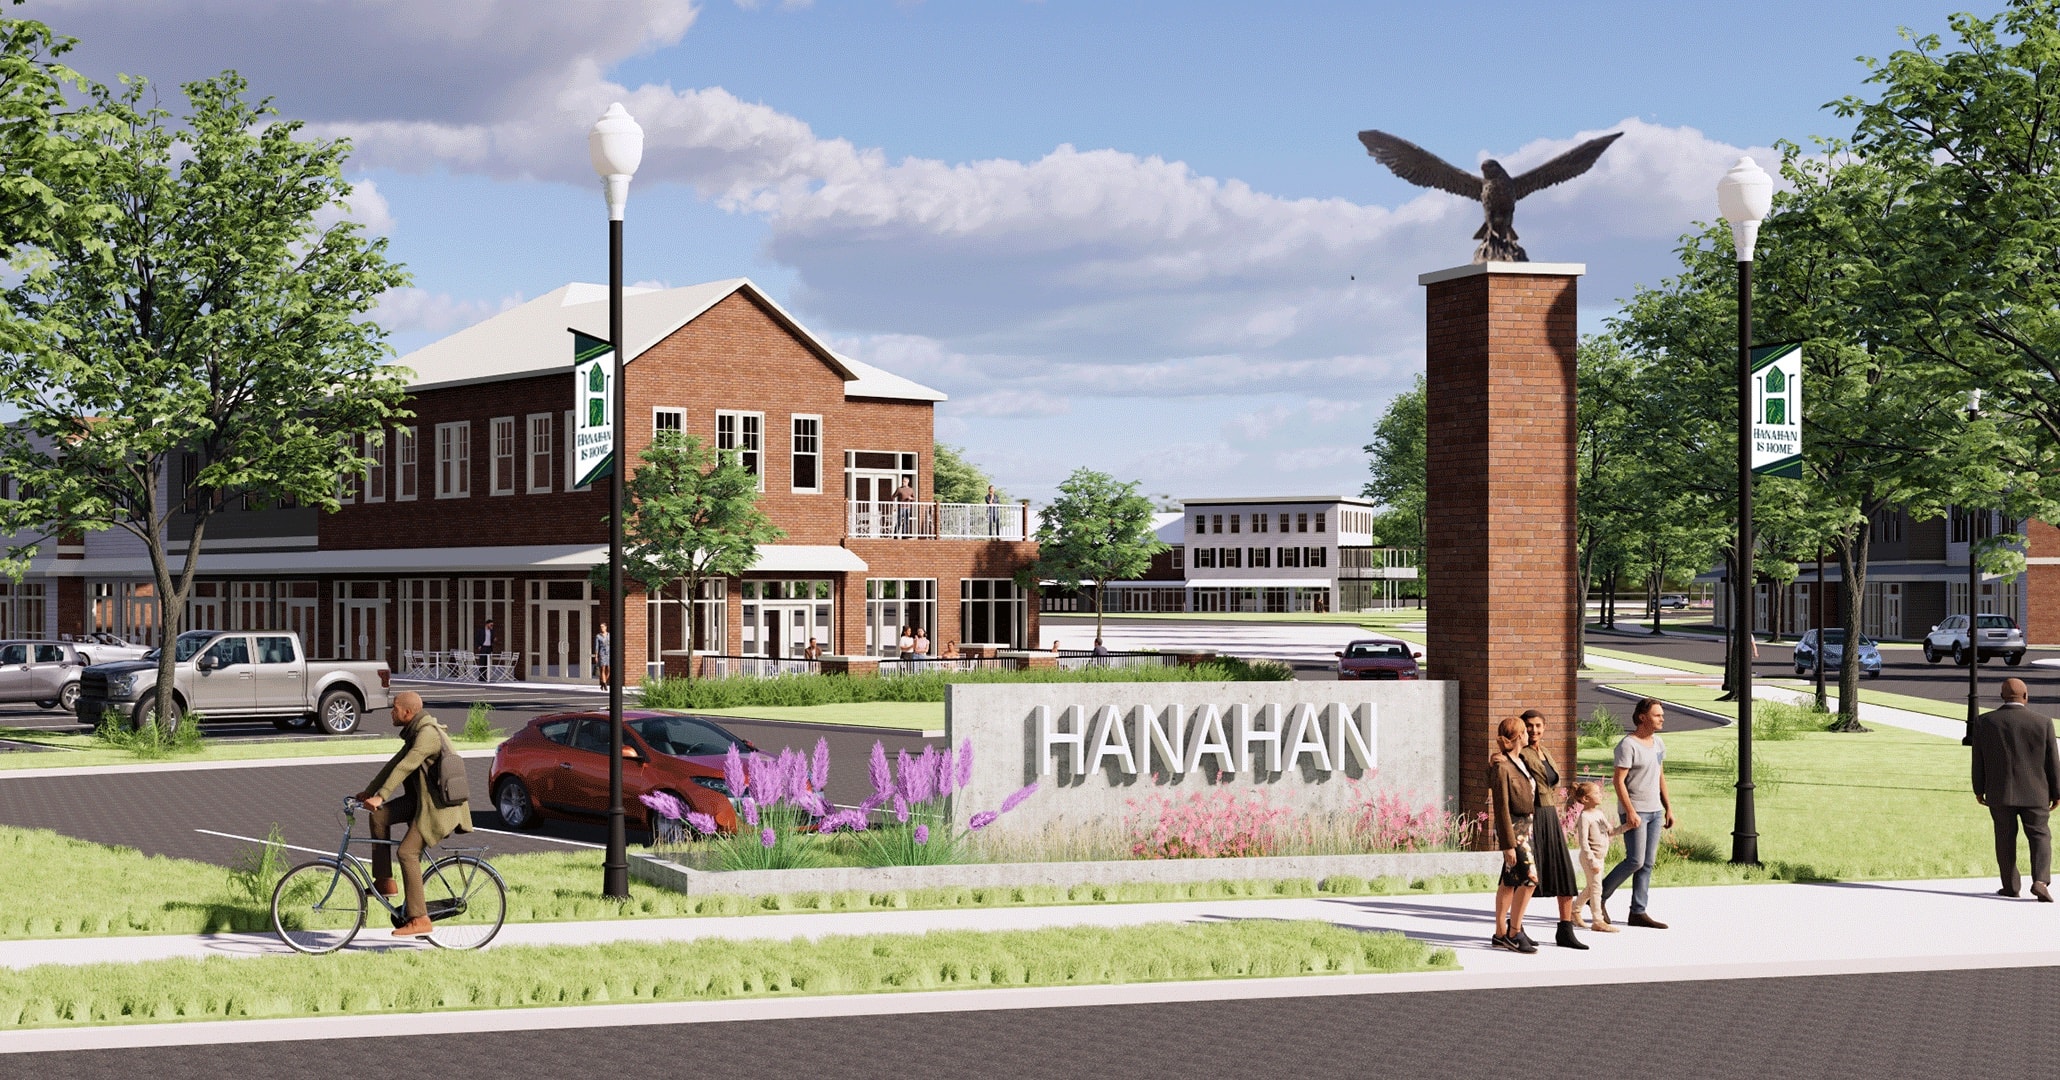 BOUDREAUX planners worked with City of Hanahan to develop a Master Plan for their Town Center